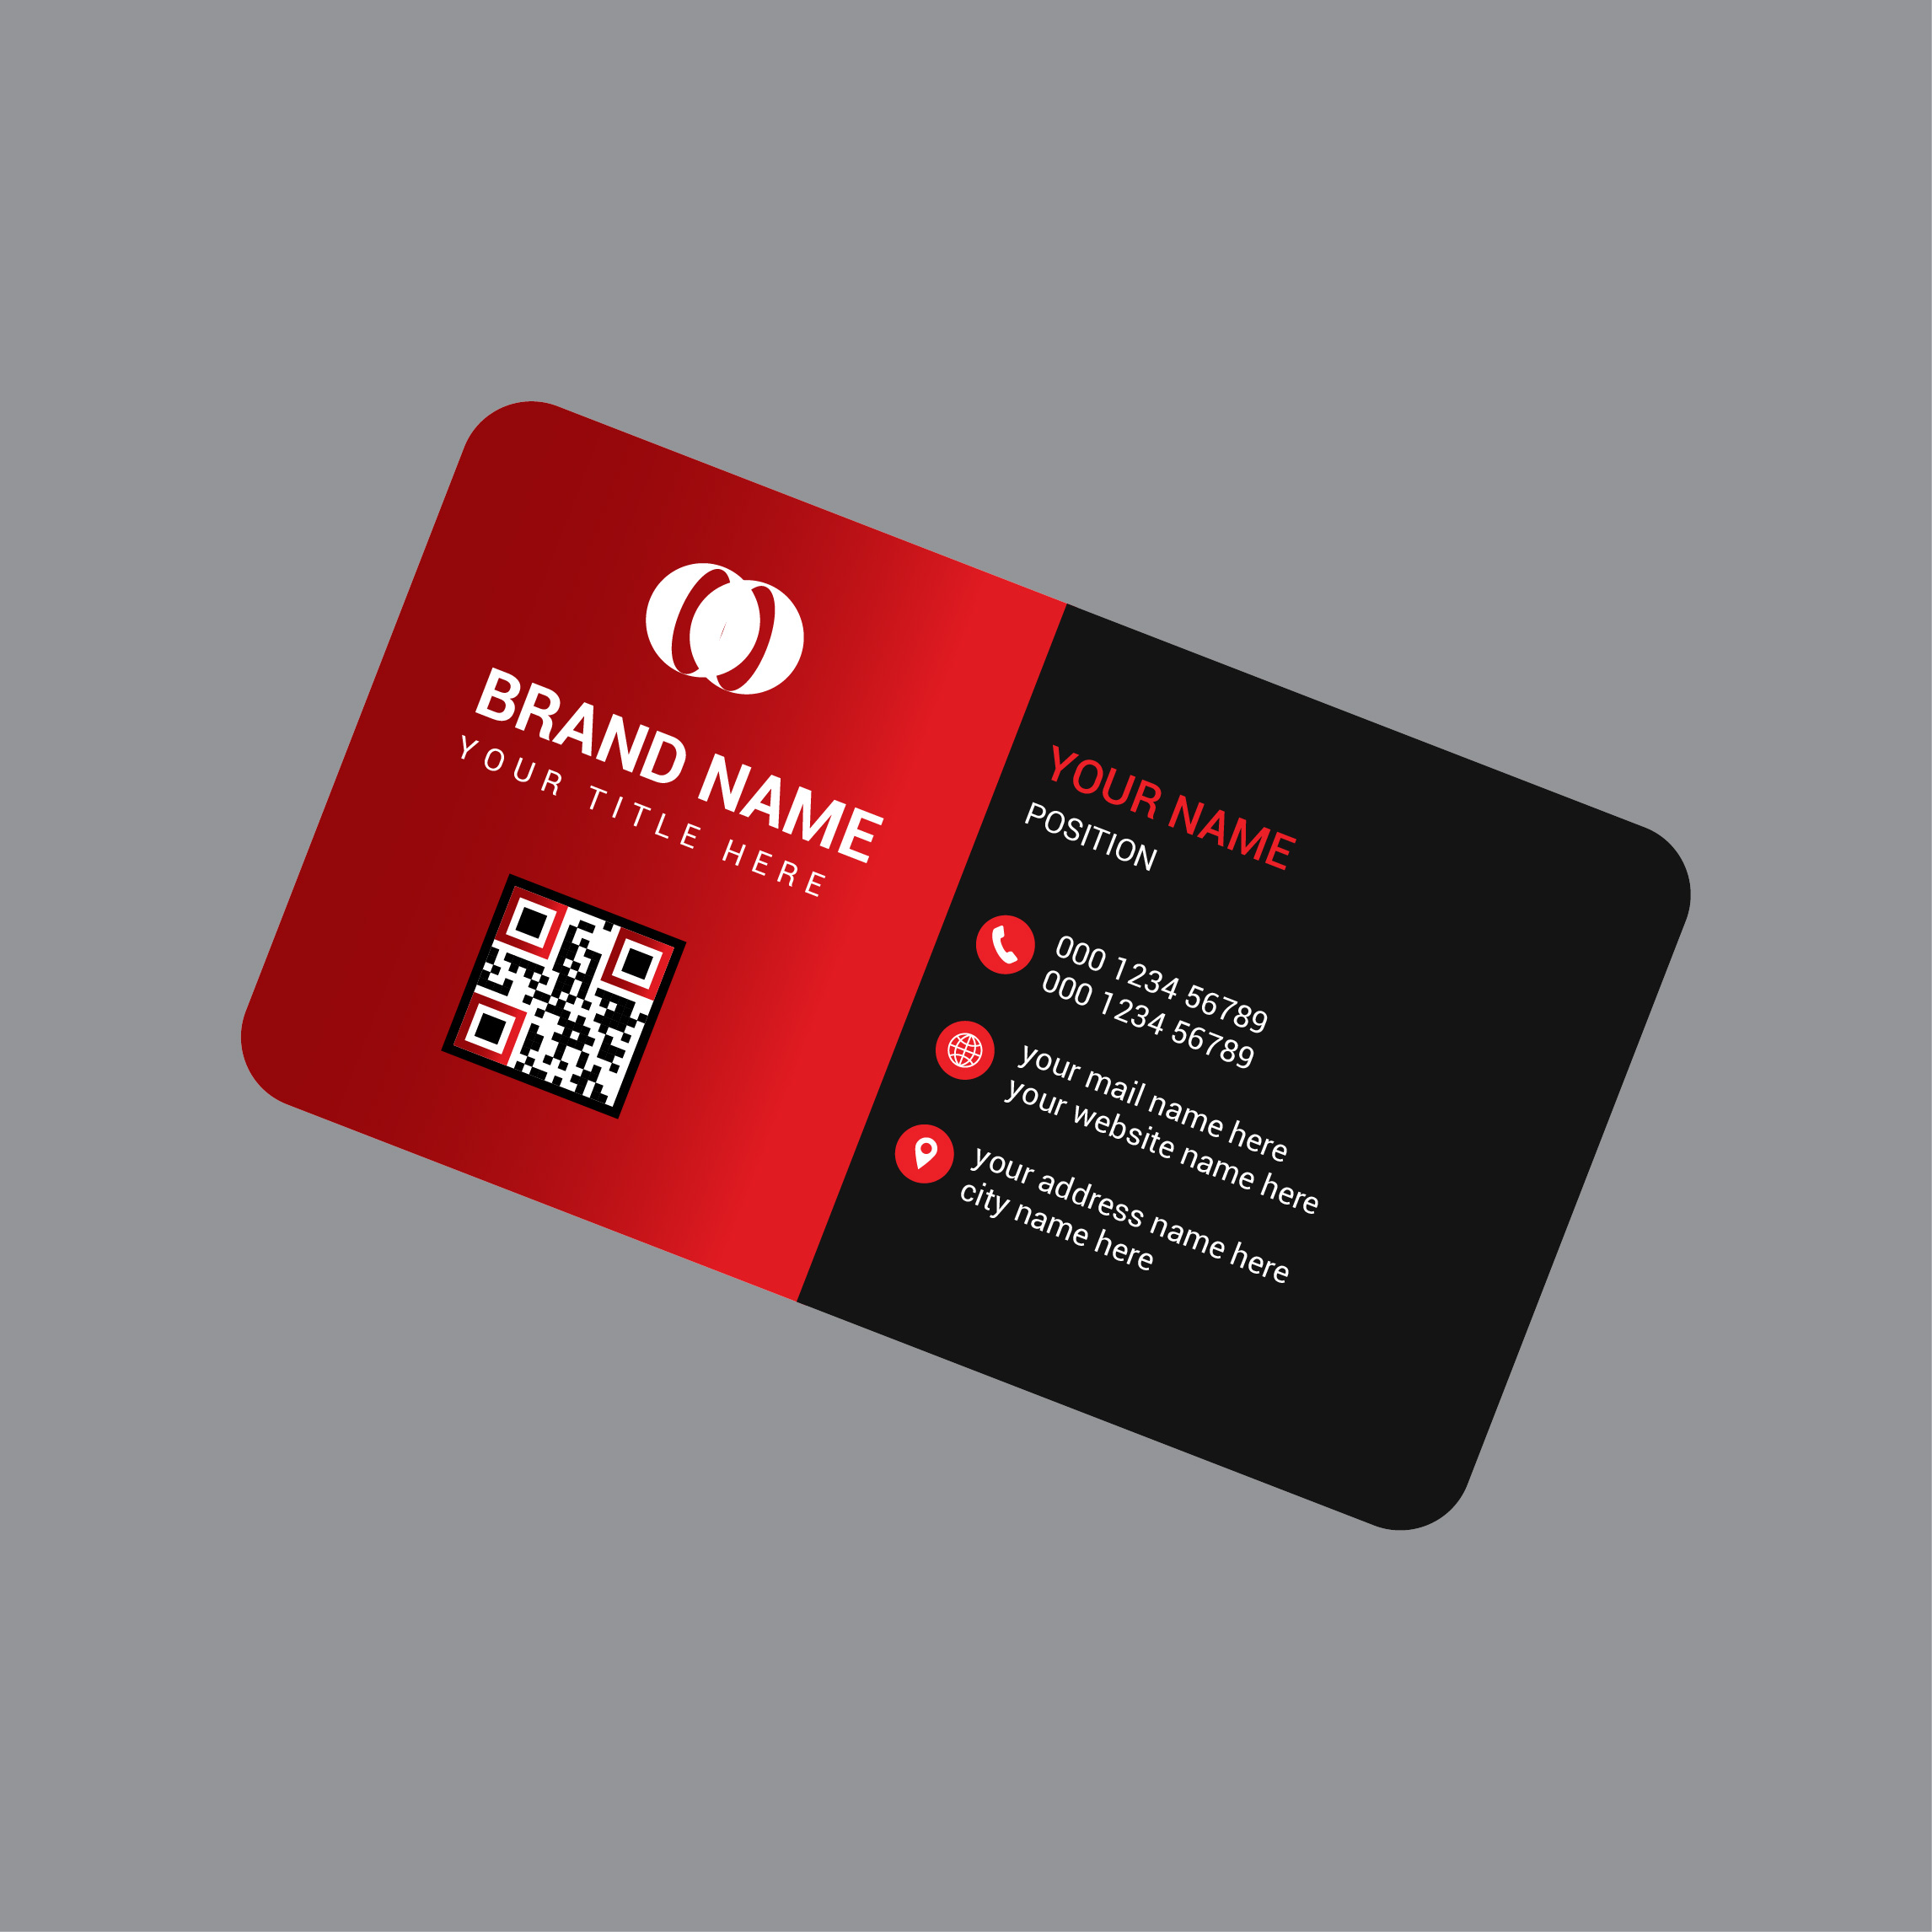 Modern Business Card Design cover image.